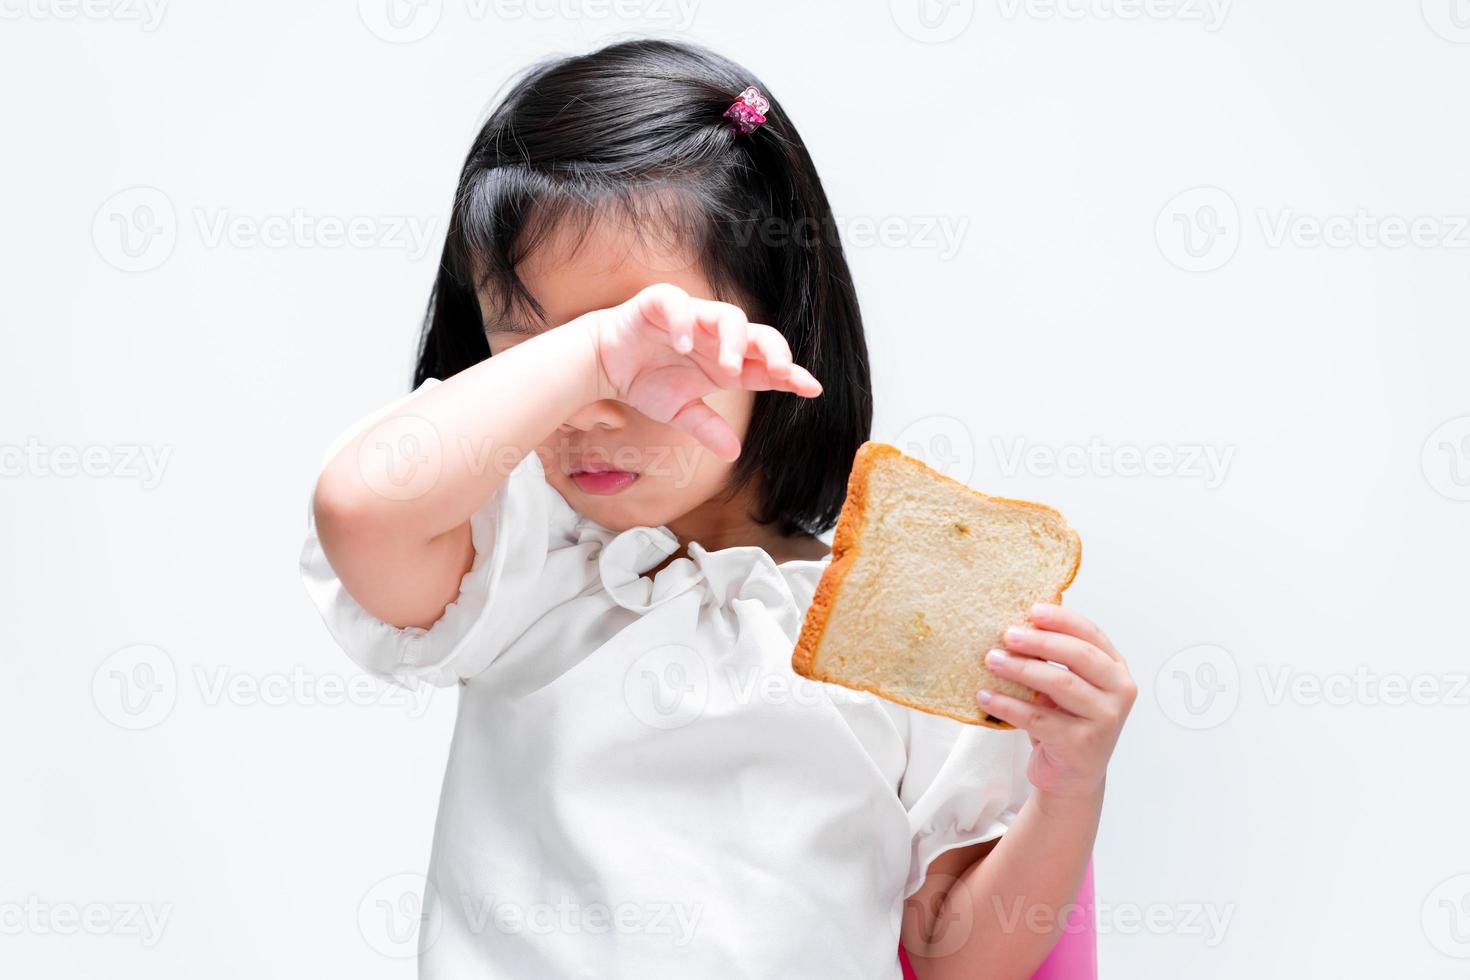 A cute little girl rubs her eyes from the back of her wrists due to itching or irritation. Child holding bread. Food concepts and food allergies. photo